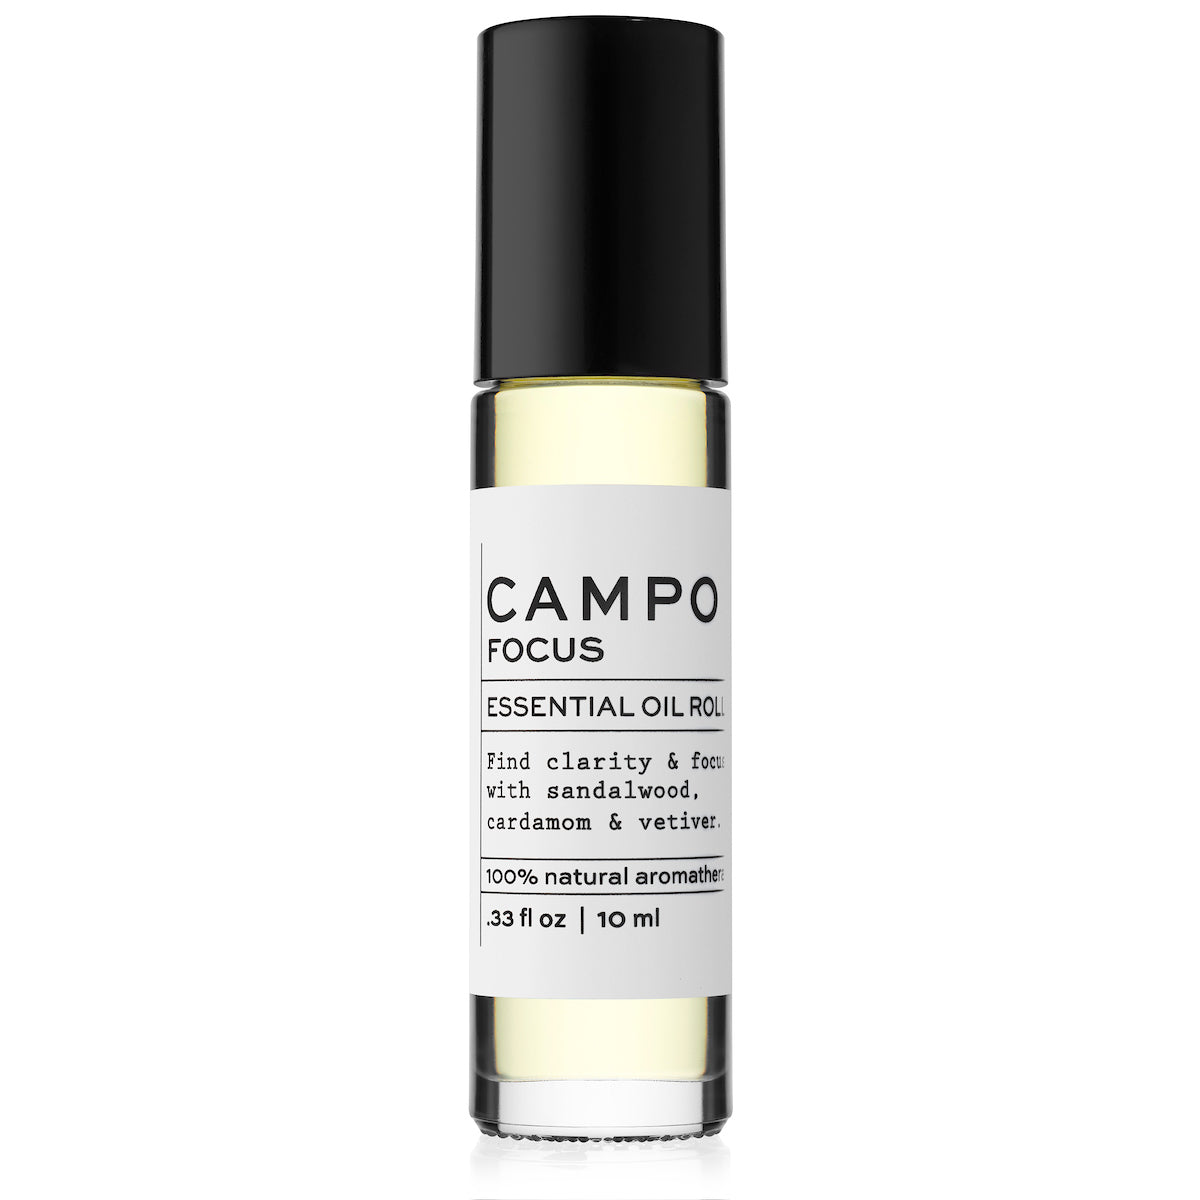 Campo Beauty Essential Oil FOCUS Blend Roll-On that in 5 ml. Inspires feelings of peace and tranquility to promote heightened awareness and mental clarity. Feel clarity and grounded with this 100% natural essential oil roll-on blend of Australian Sandalwood, Cardamom, Vetiver & Cedarwood Atlas, Himalayan, Texas & Virginia.